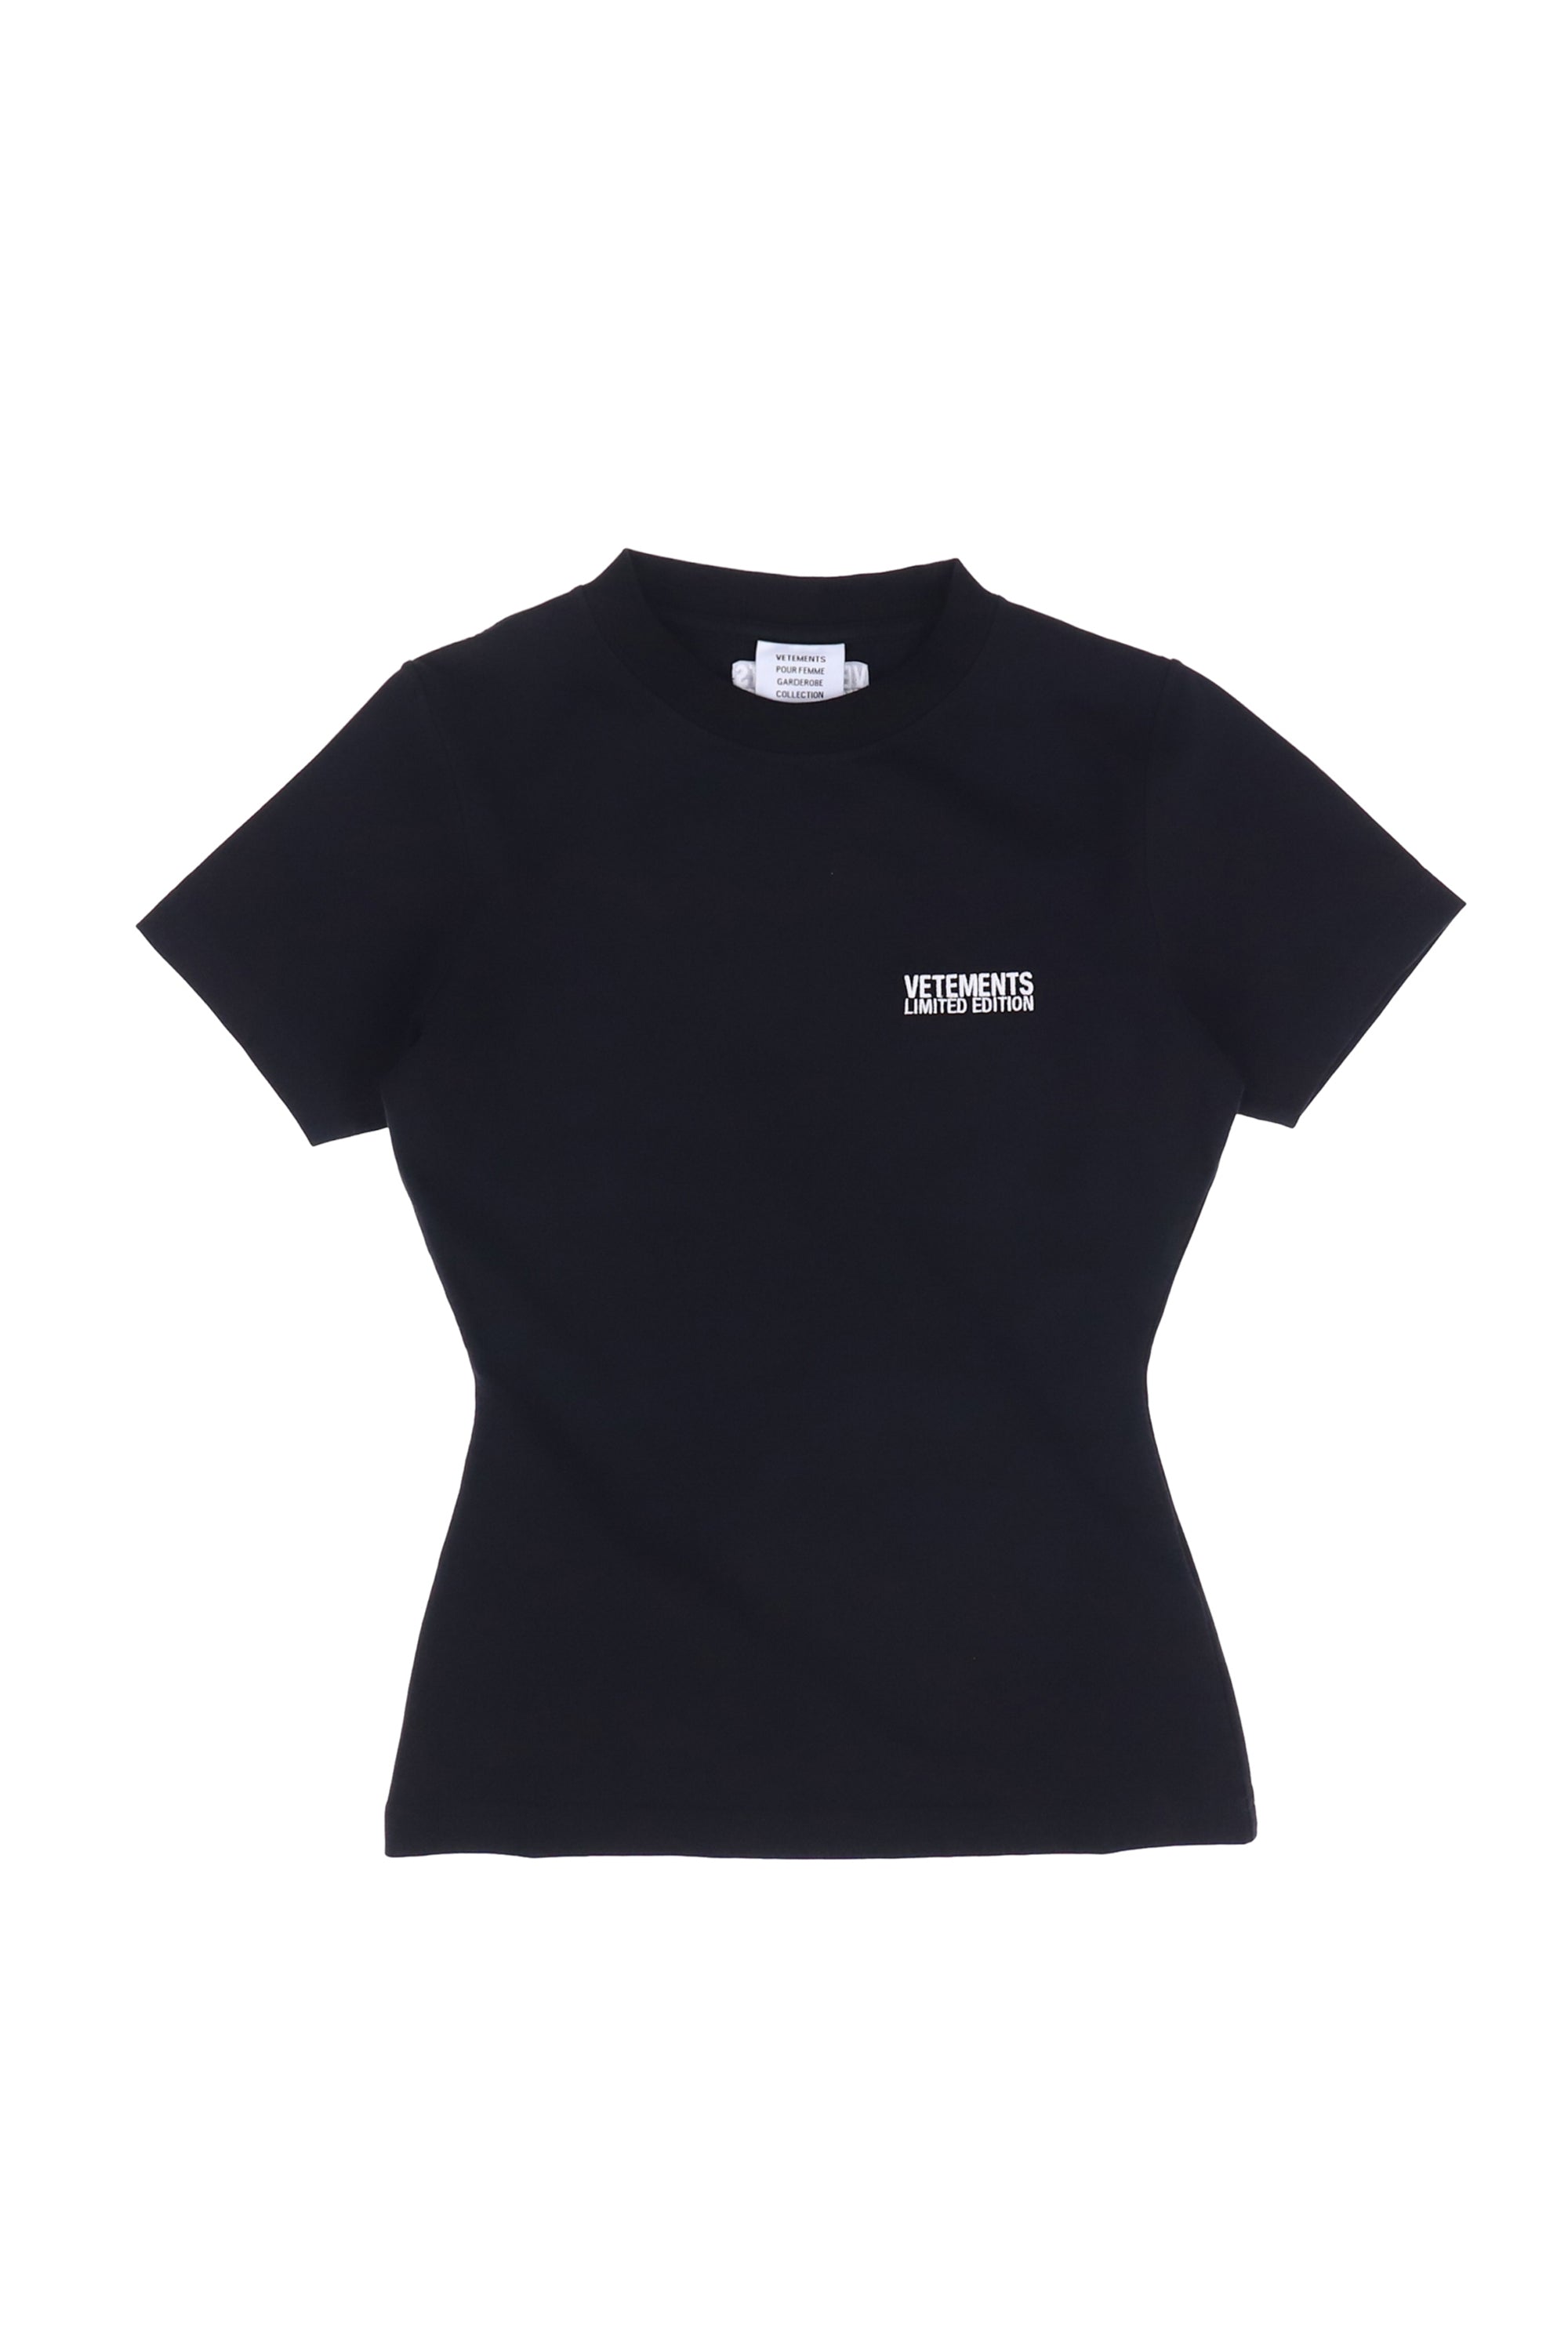 VETEMENTS ヴェトモン SS24 EMBROIDERED LOGO FITTED T-SHIRT / BLK